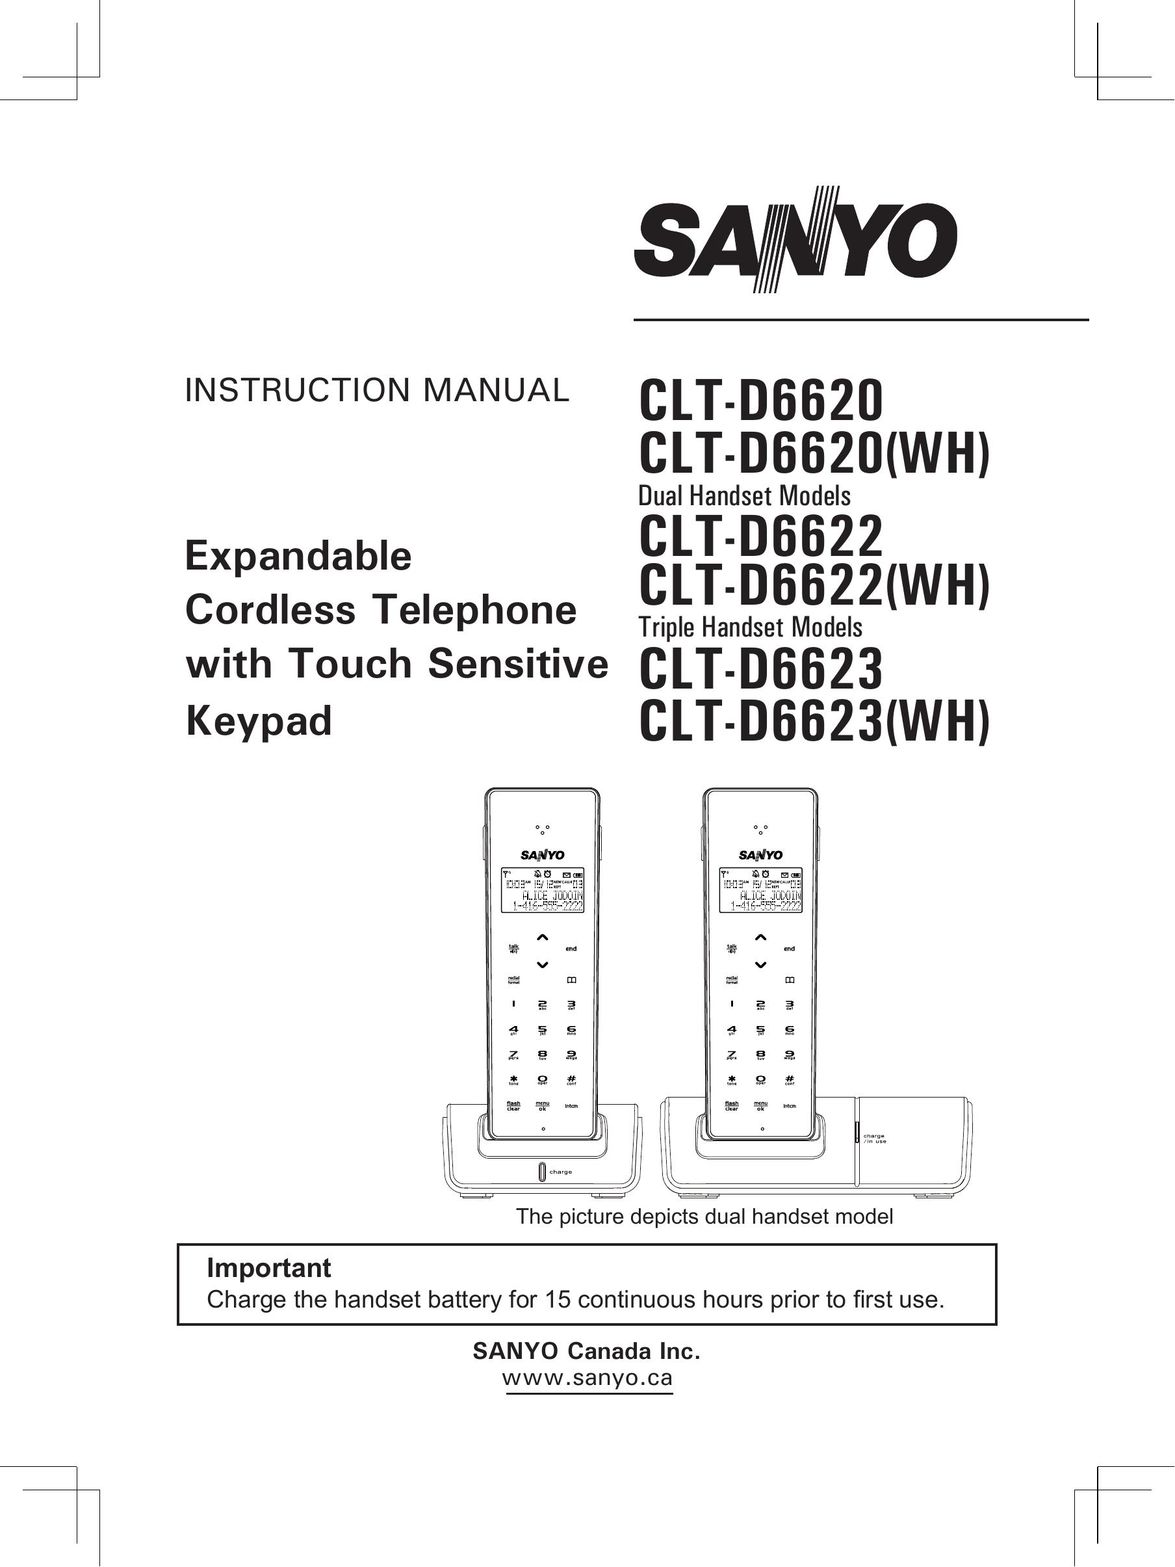 Sanyo CLT-D6620(WH) Cordless Telephone User Manual